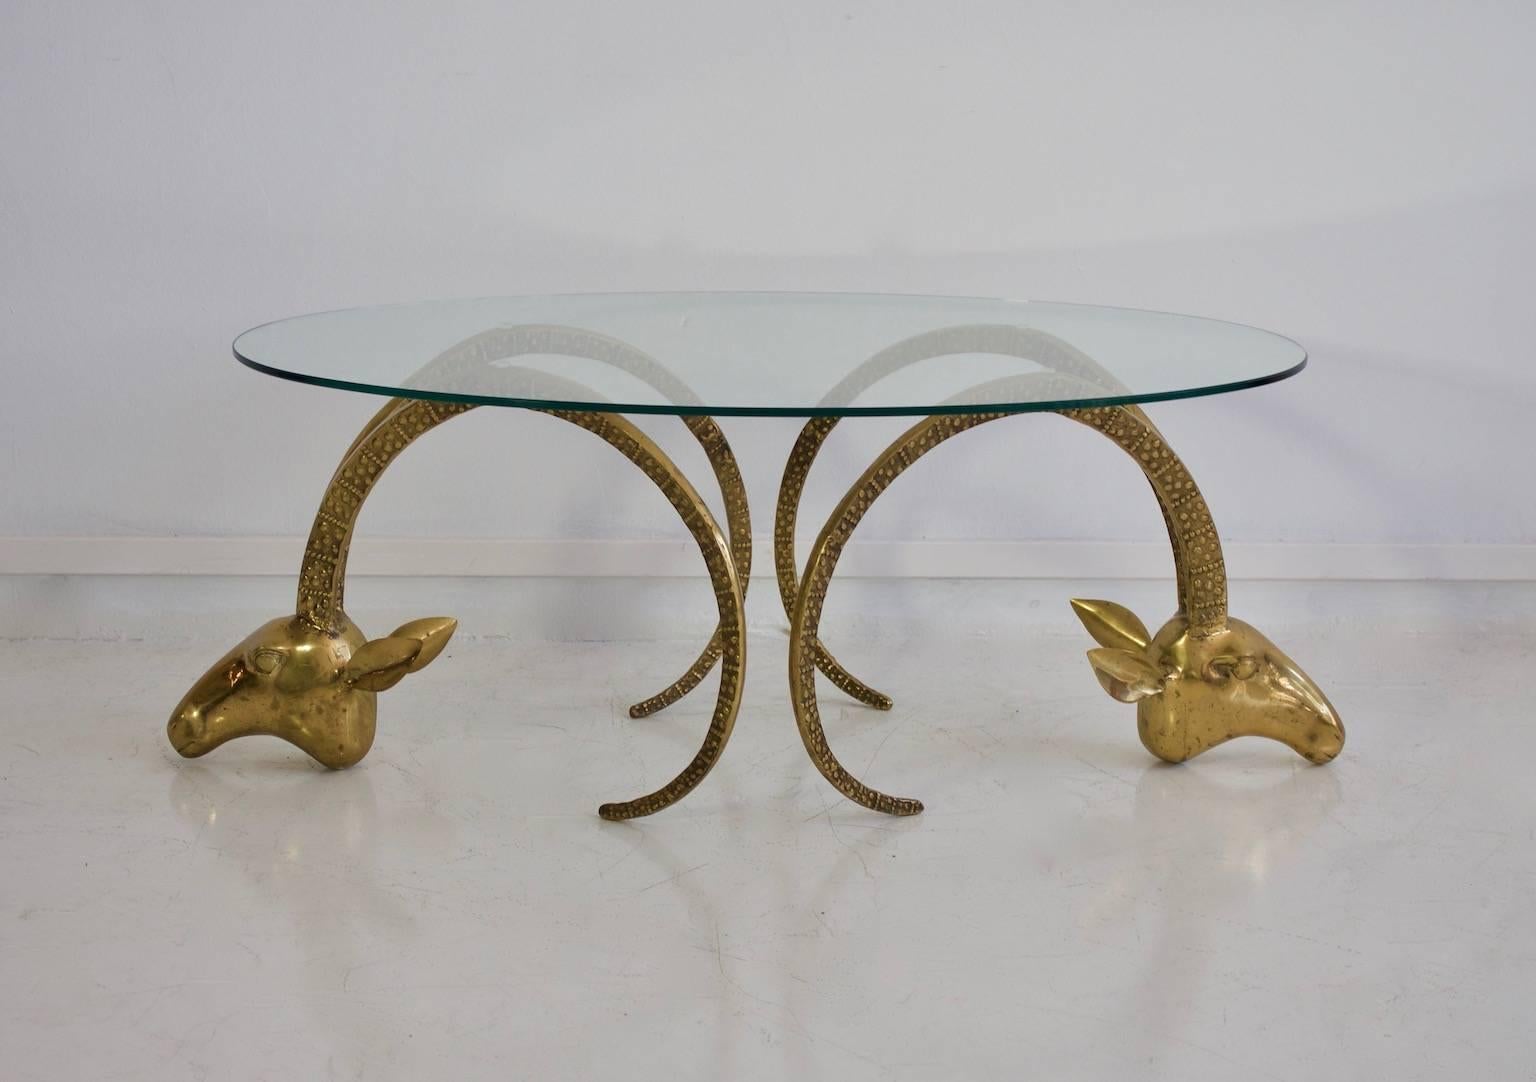 Ram's head or ibex coffee table in the style of Alain Chervet. Frame in the form of two ibex heads made of brass, with overlapping oval glass plate.